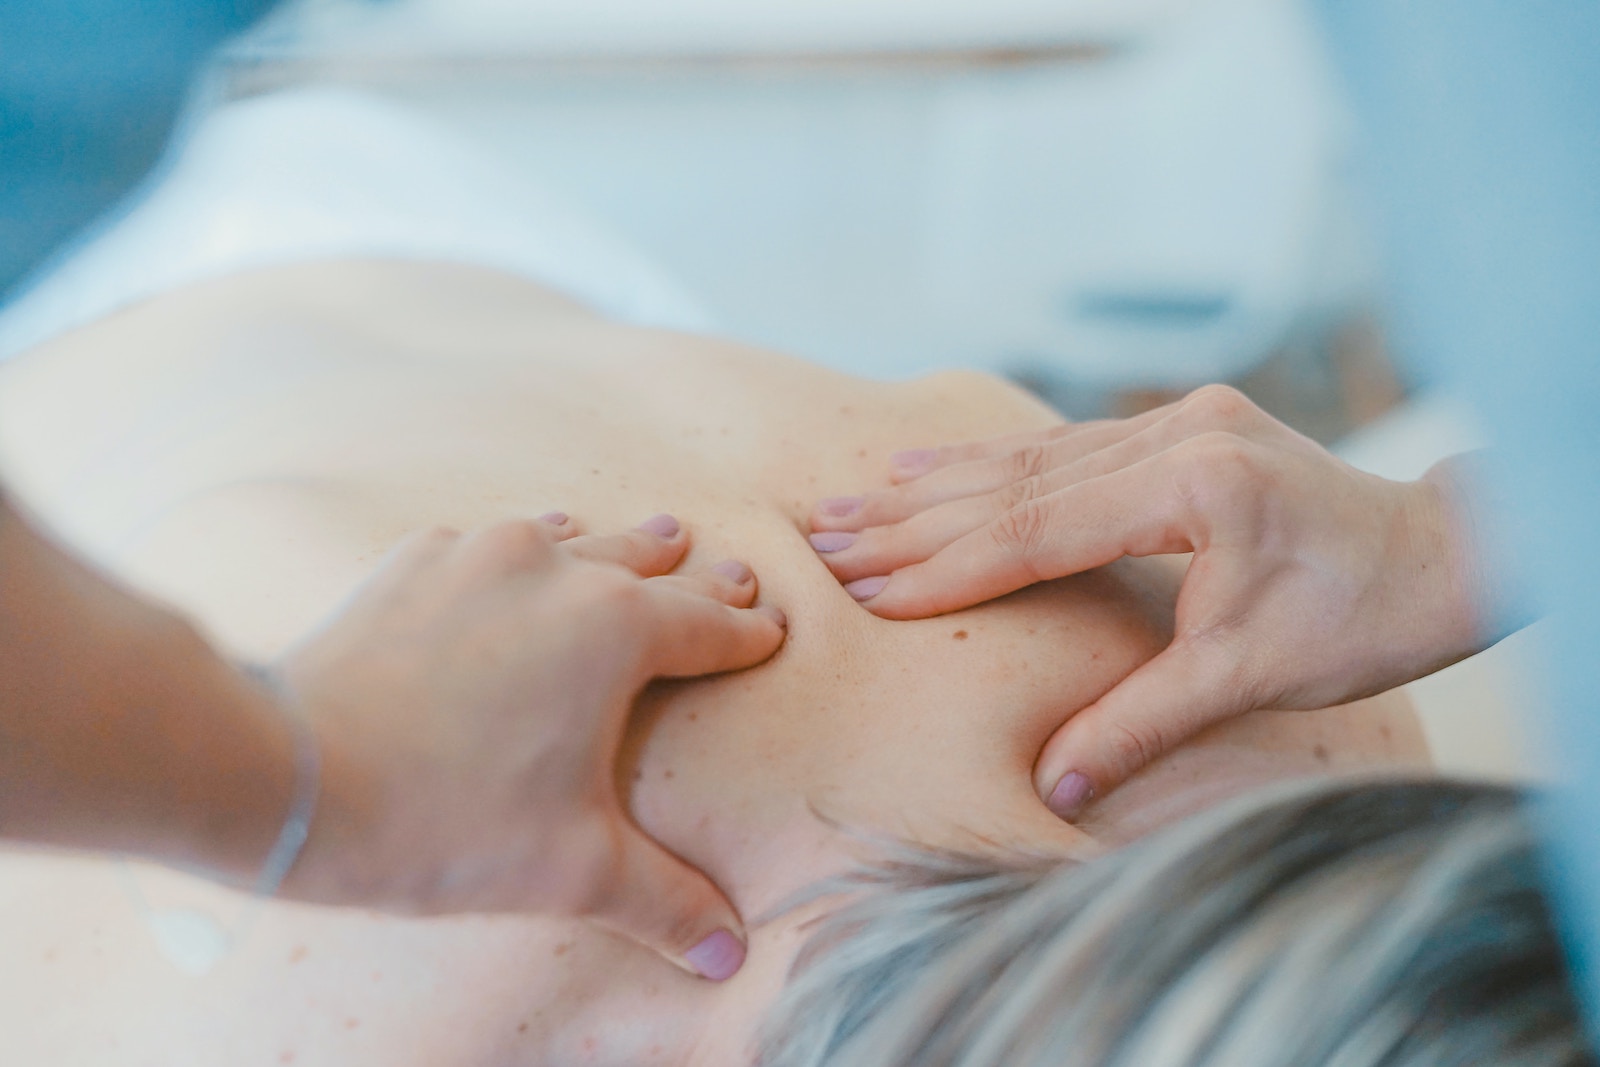 Treating neck pain through chiropractic care